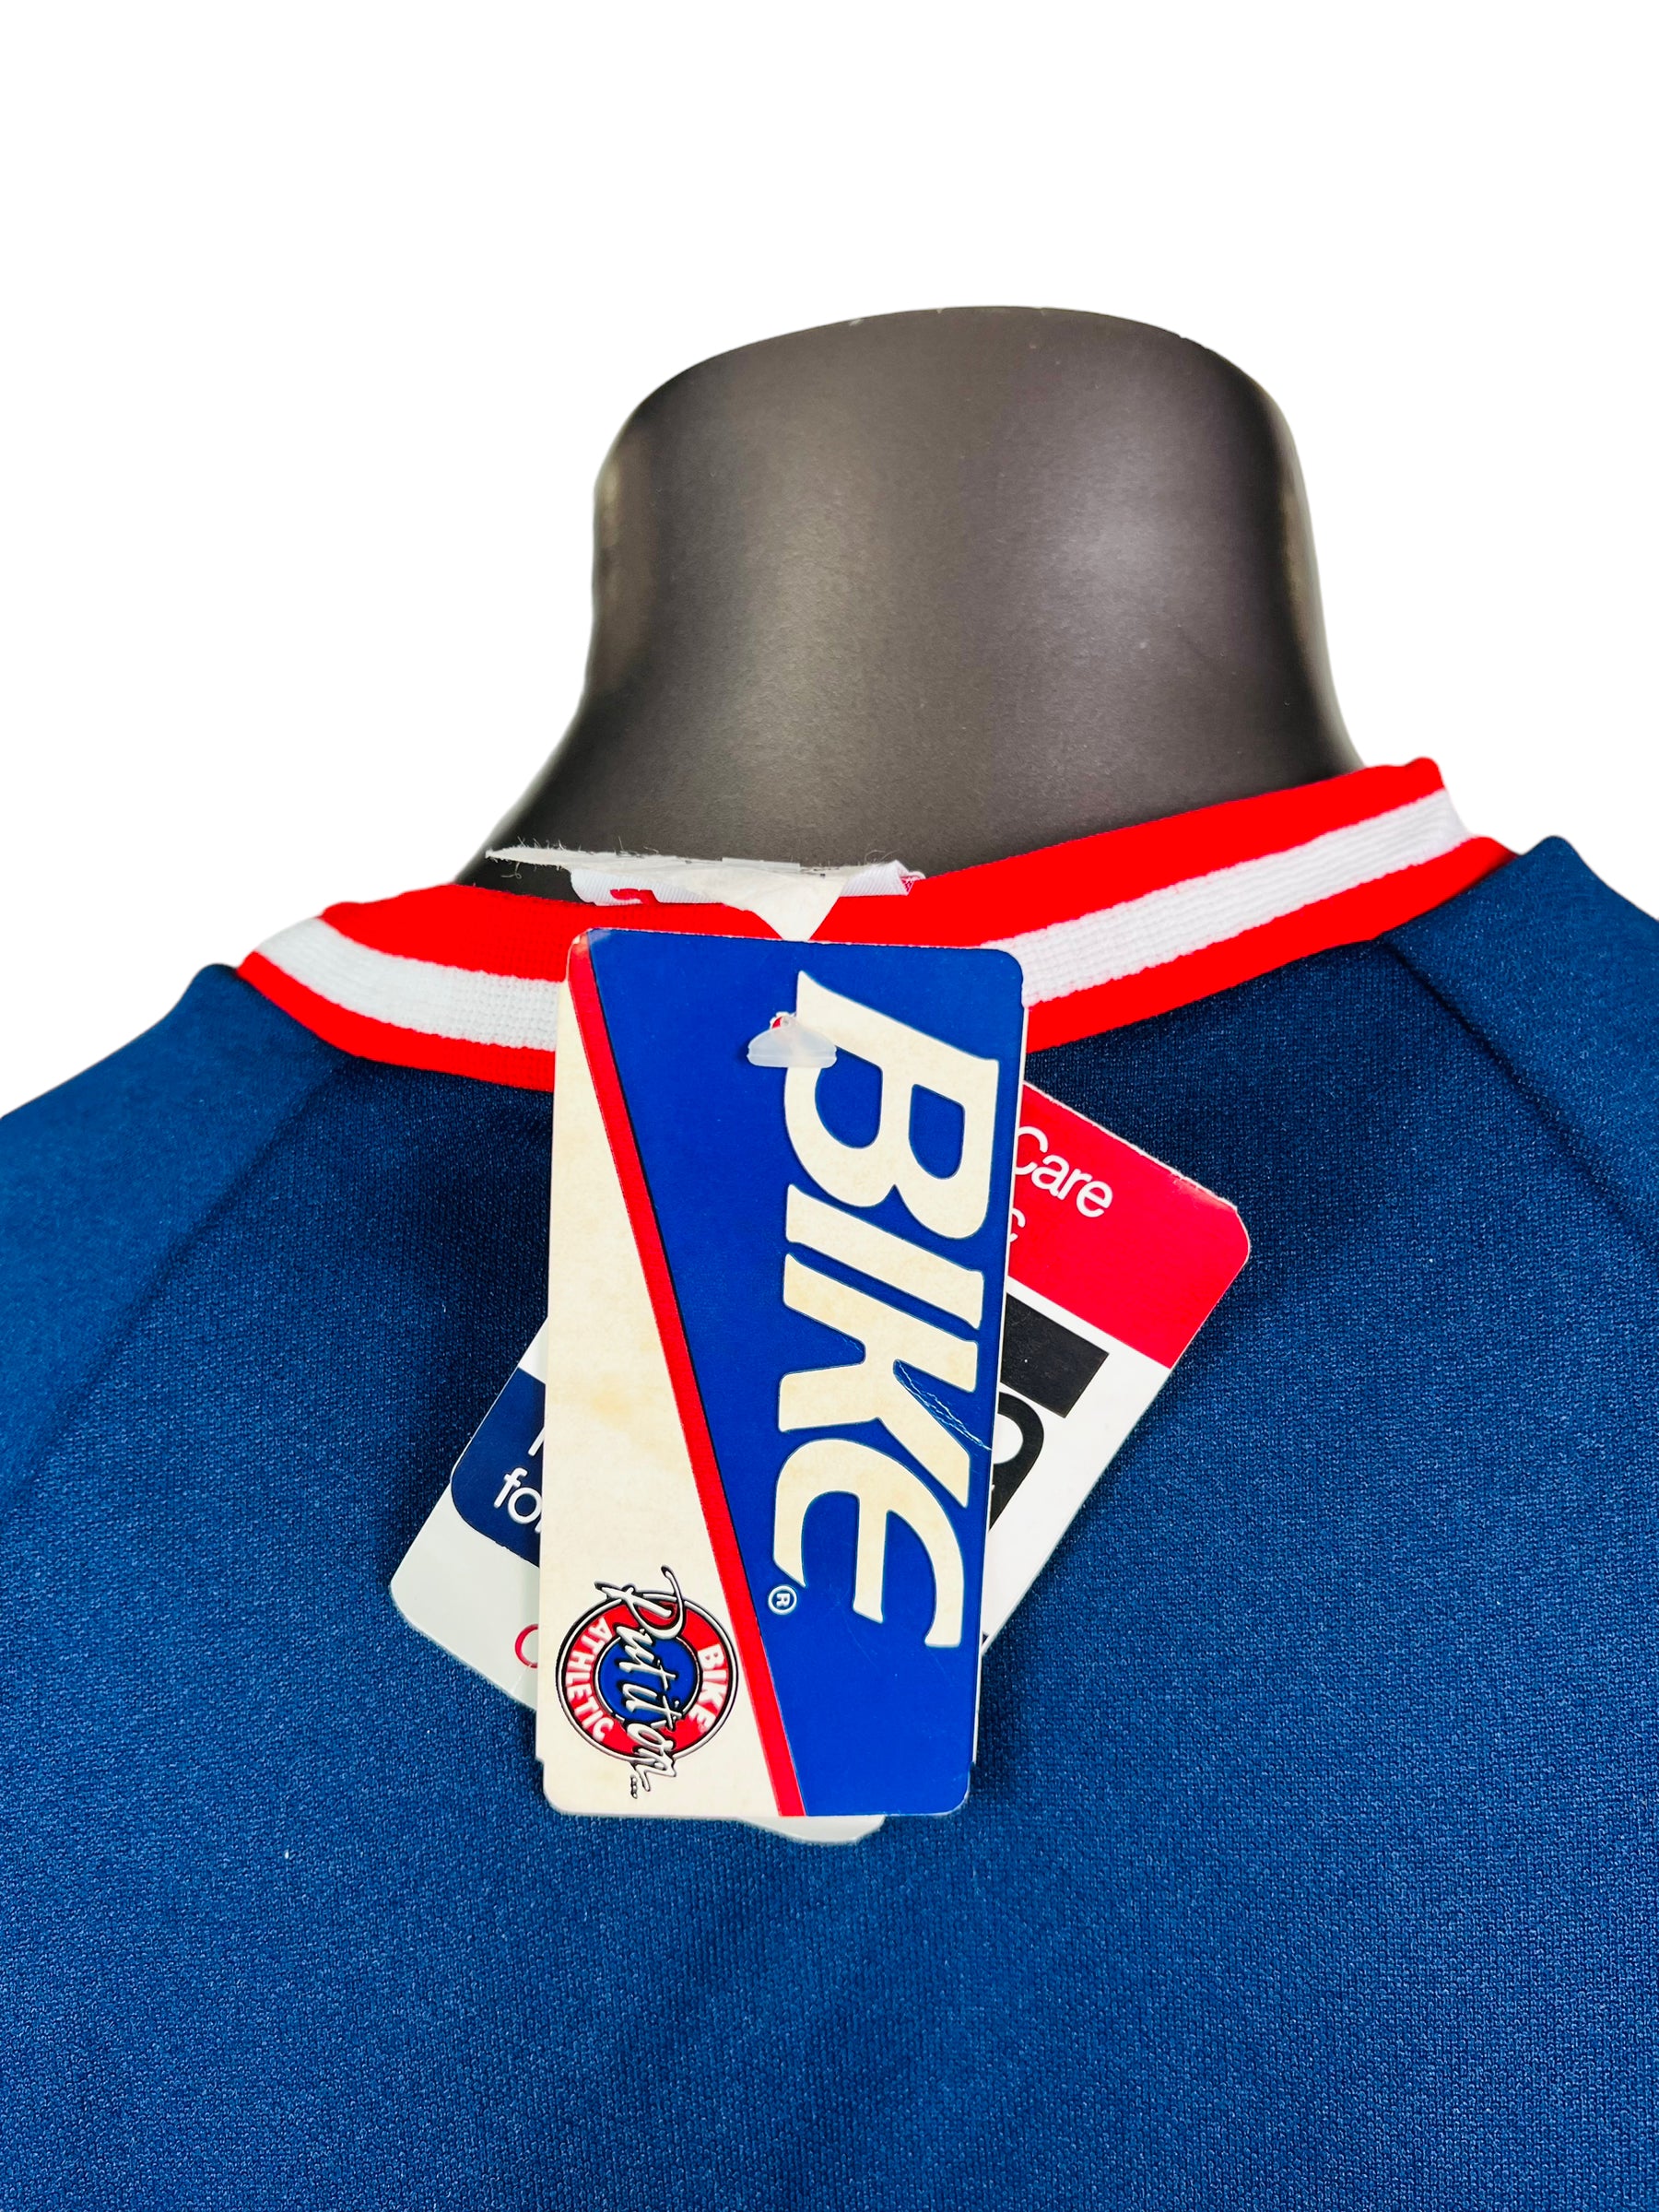 phillies cycling jersey